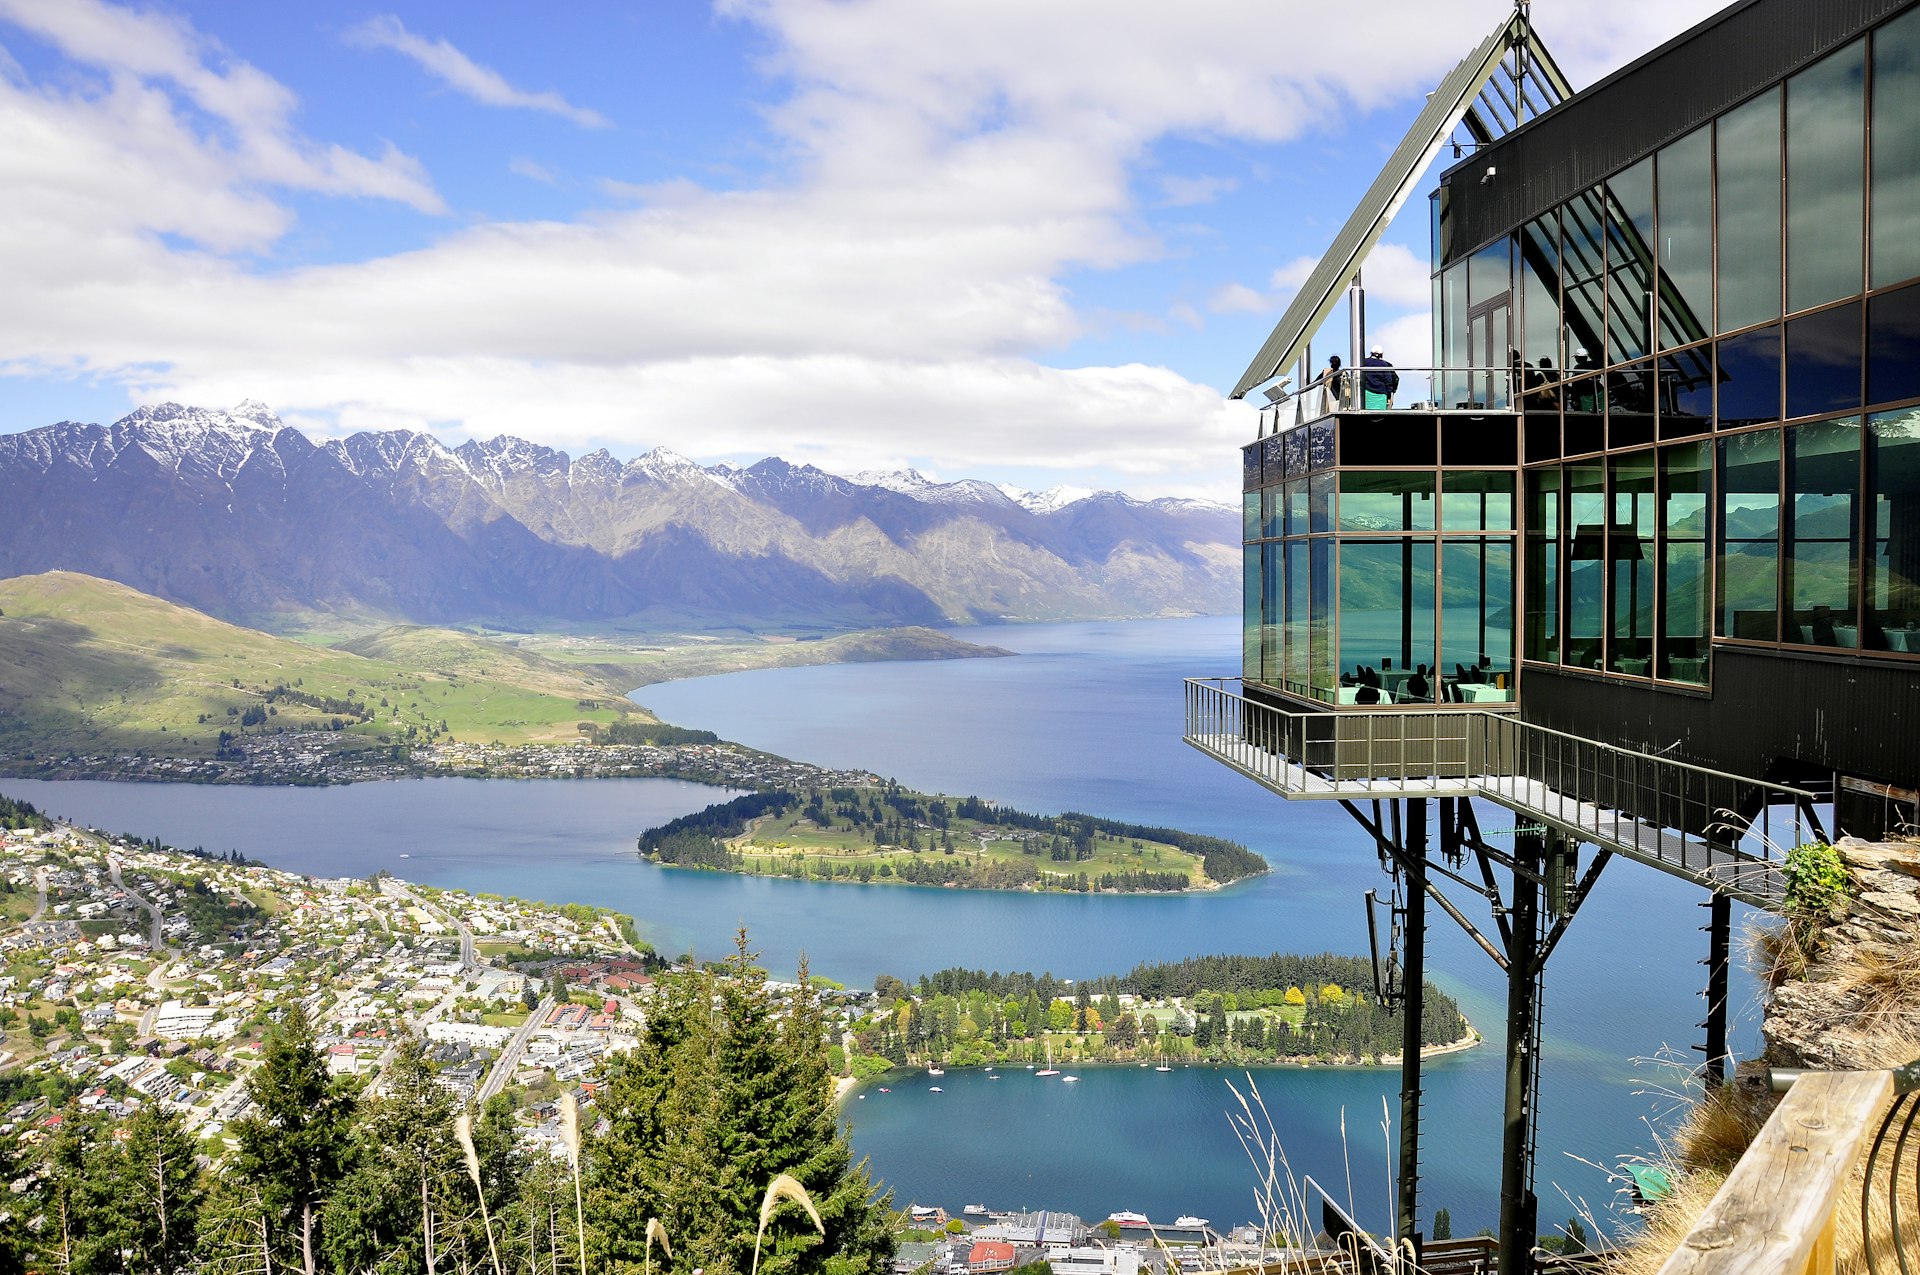 Hoved Clip sommerfugl Rastløs 8 of the best places to visit in New Zealand - Lonely Planet